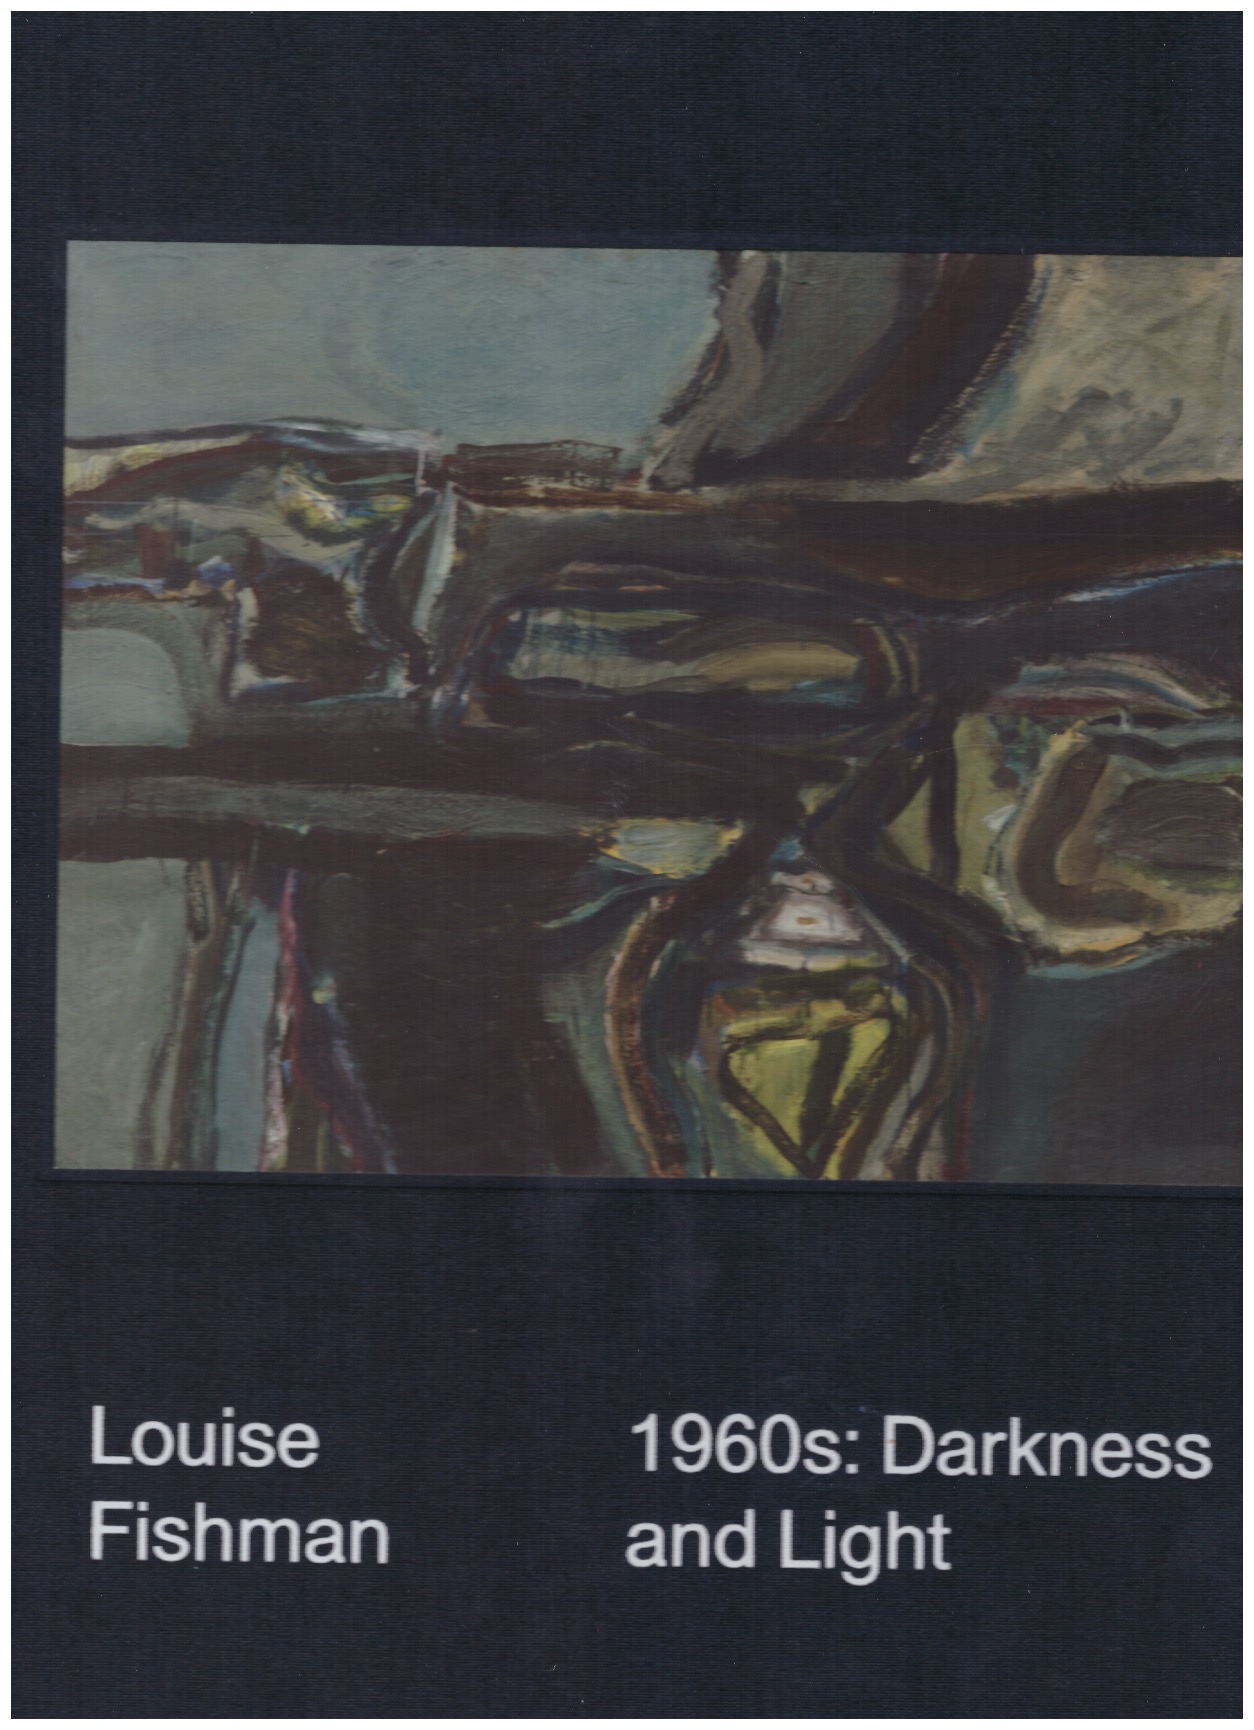 FISHMAN, Louise - 1960s: Darkness and Light